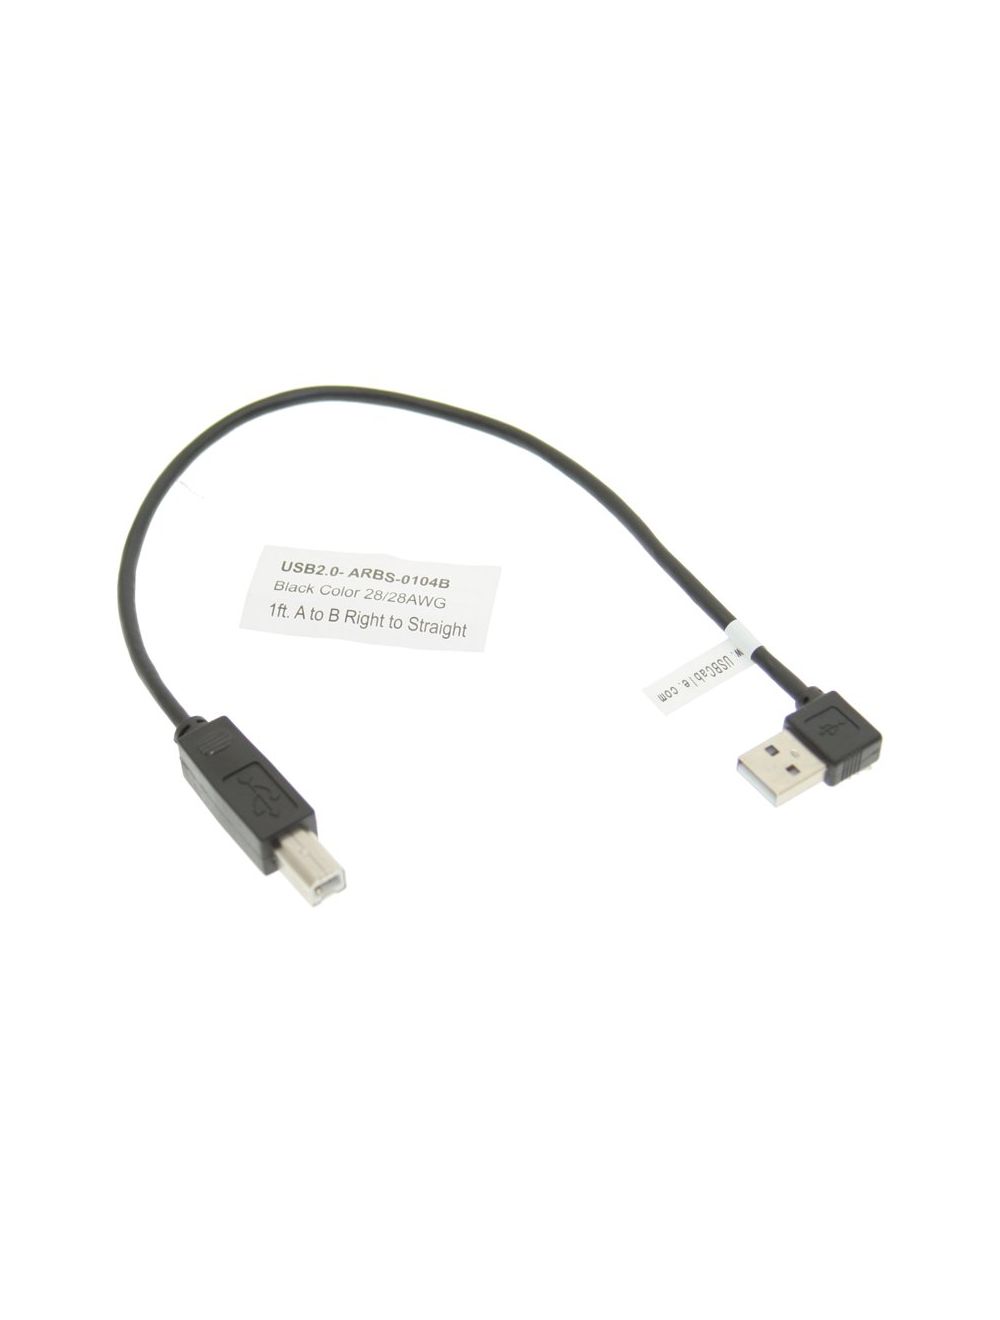 har Alfabet Vestlig 1ft. Right to Straight A to B 28/28AWG Black Cable USB 2.0 RoHS | Cooldrives